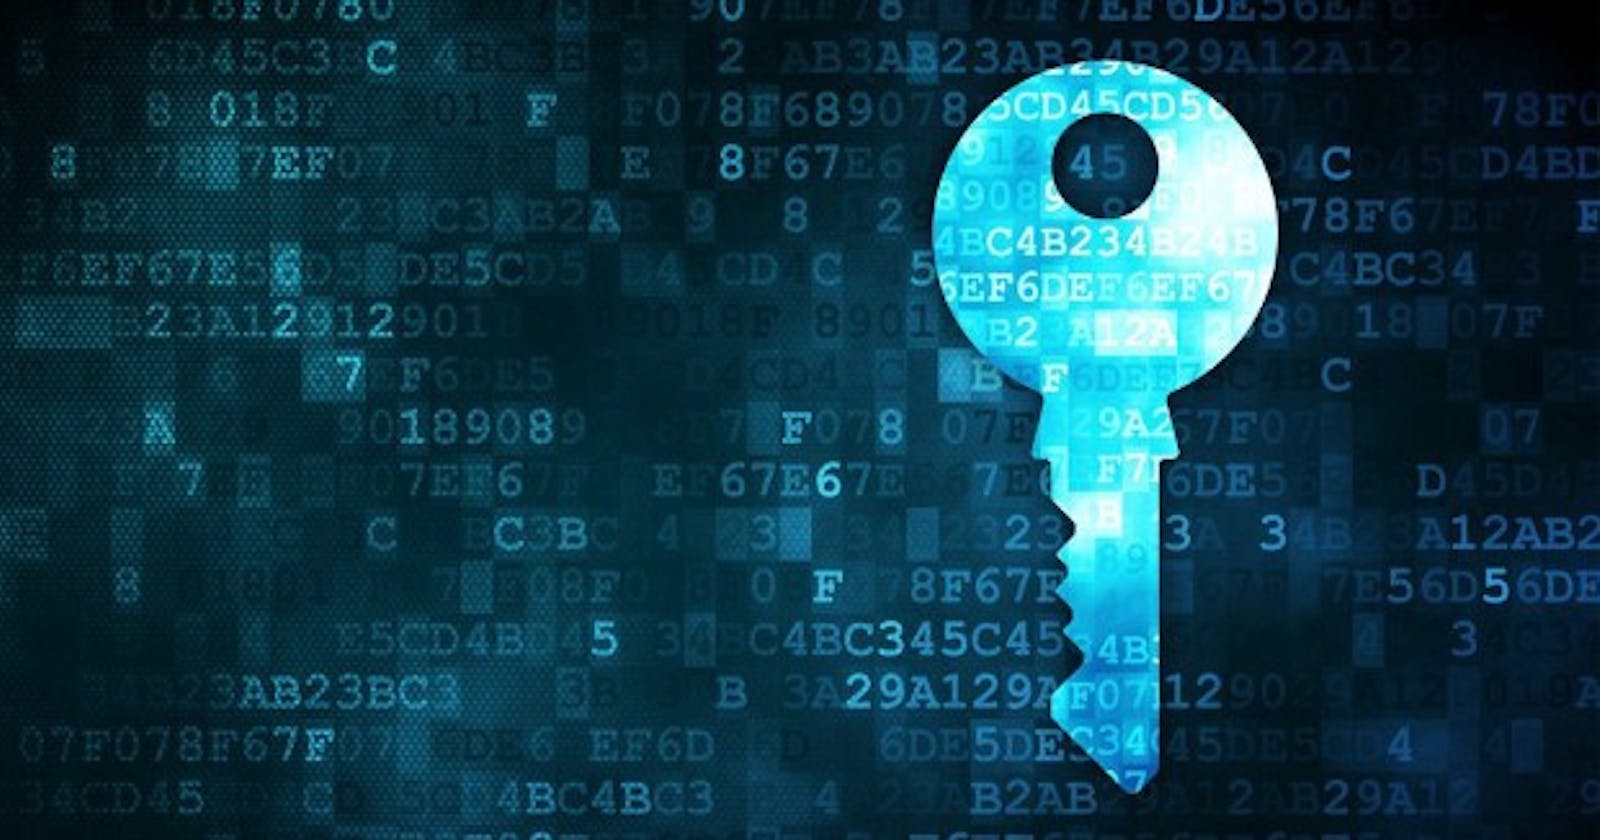 Internet 101 - Encryption and security